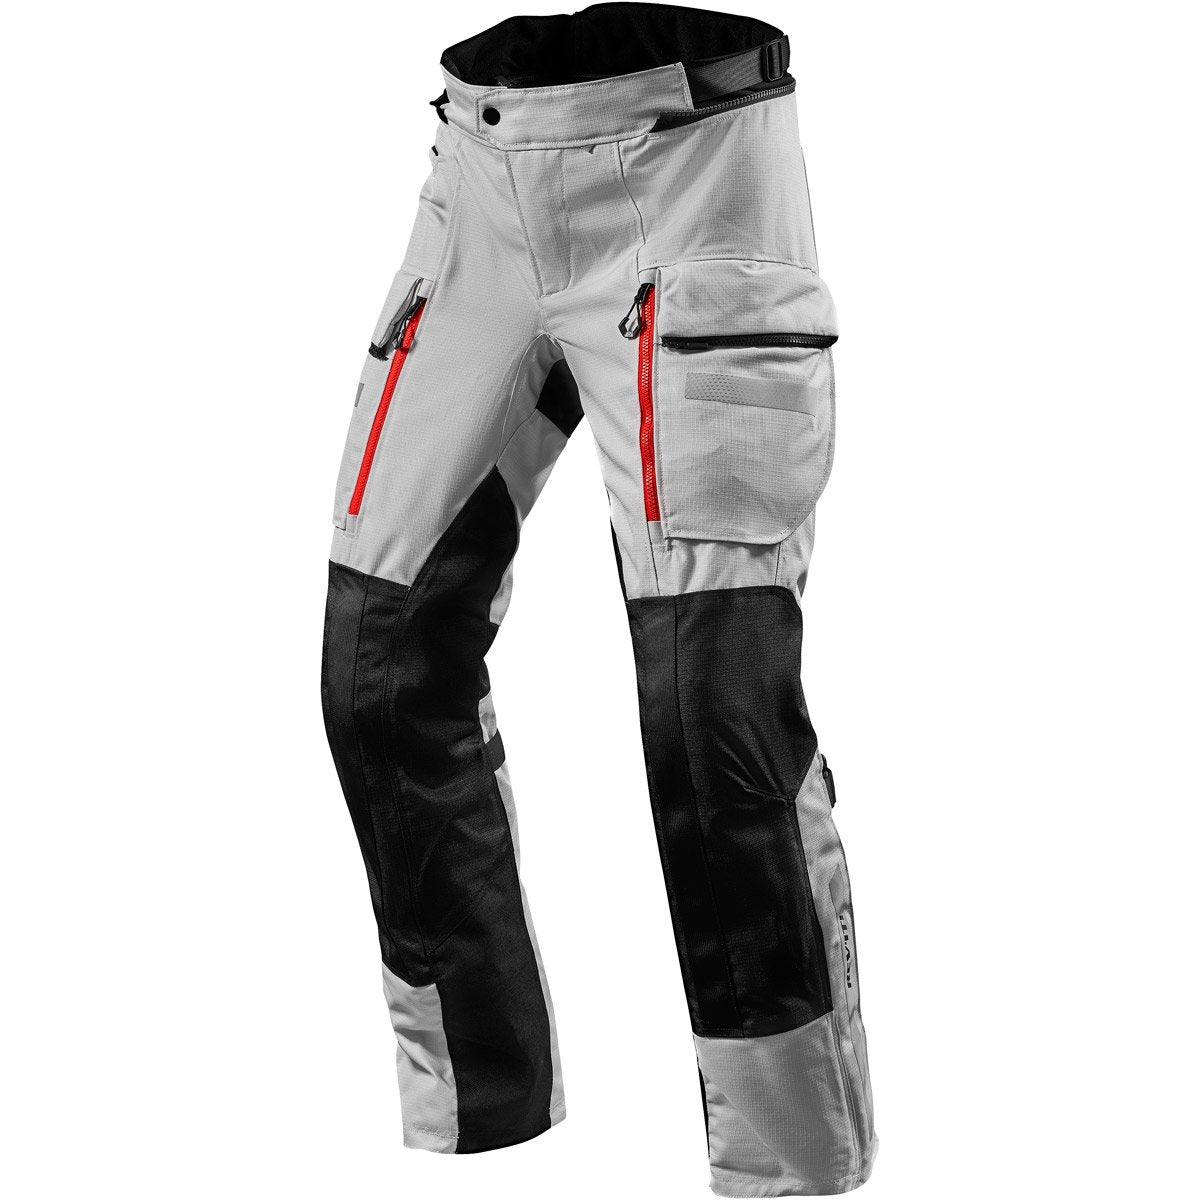 Rev It Sand 4 Trousers H2O 34in Leg WP Silver Black - Motorcycle Trousers